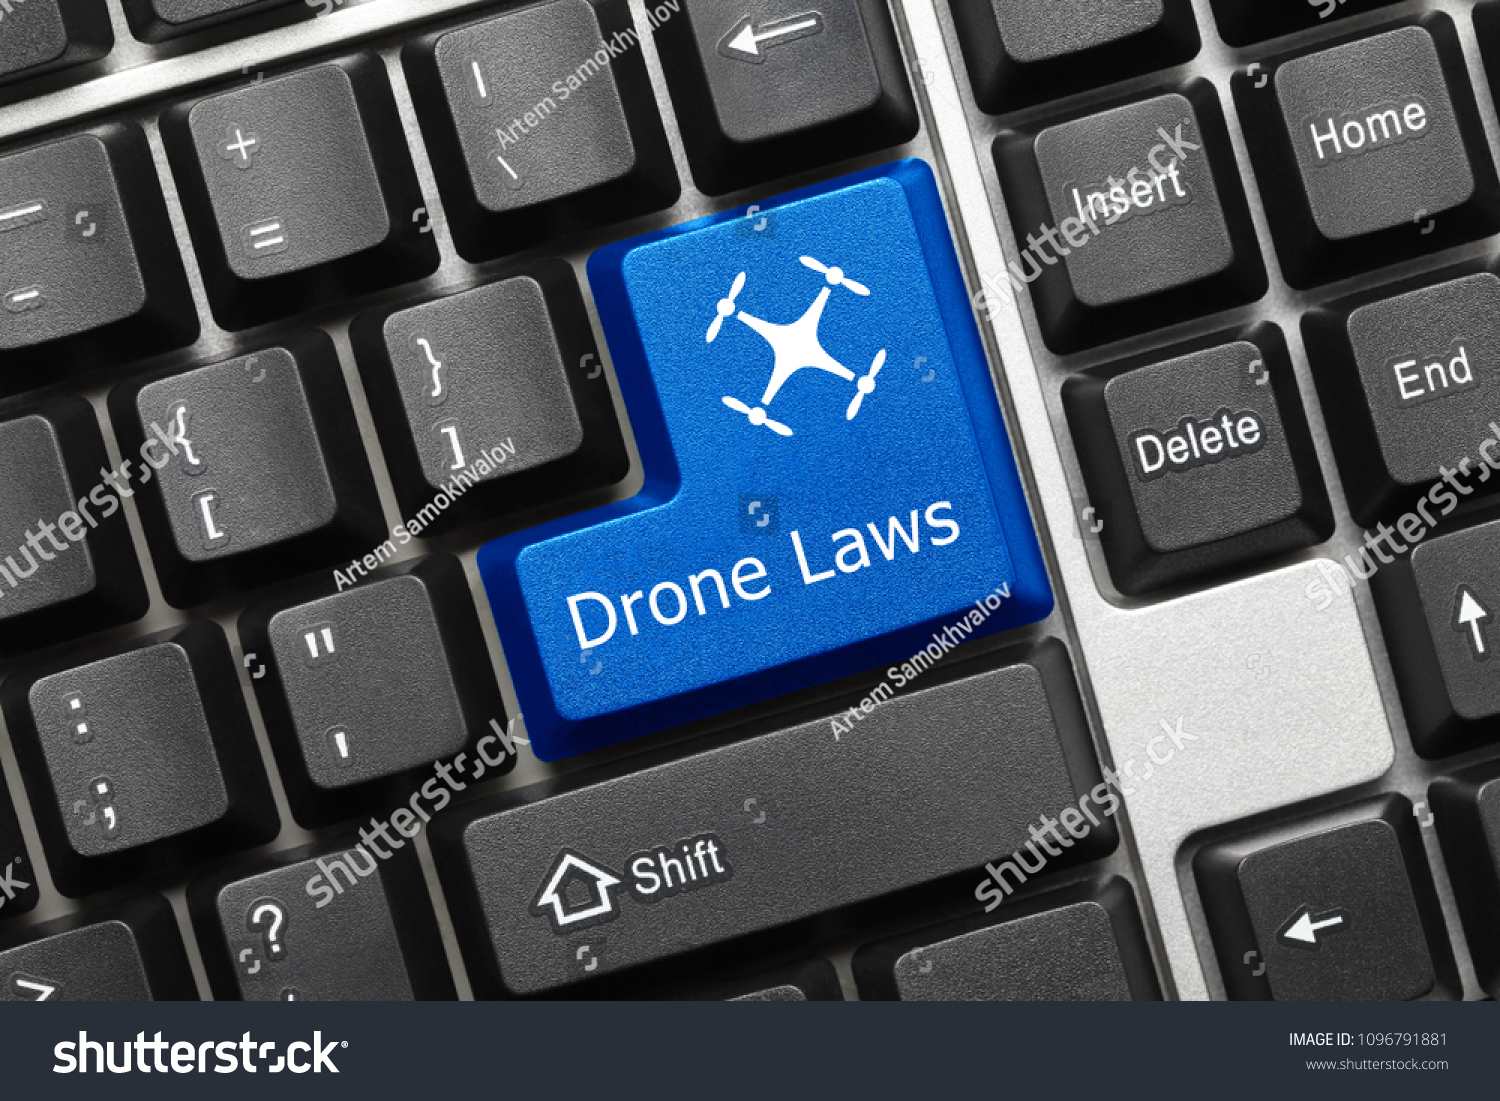 Close-up view on conceptual keyboard - Drone Laws (blue key) #1096791881